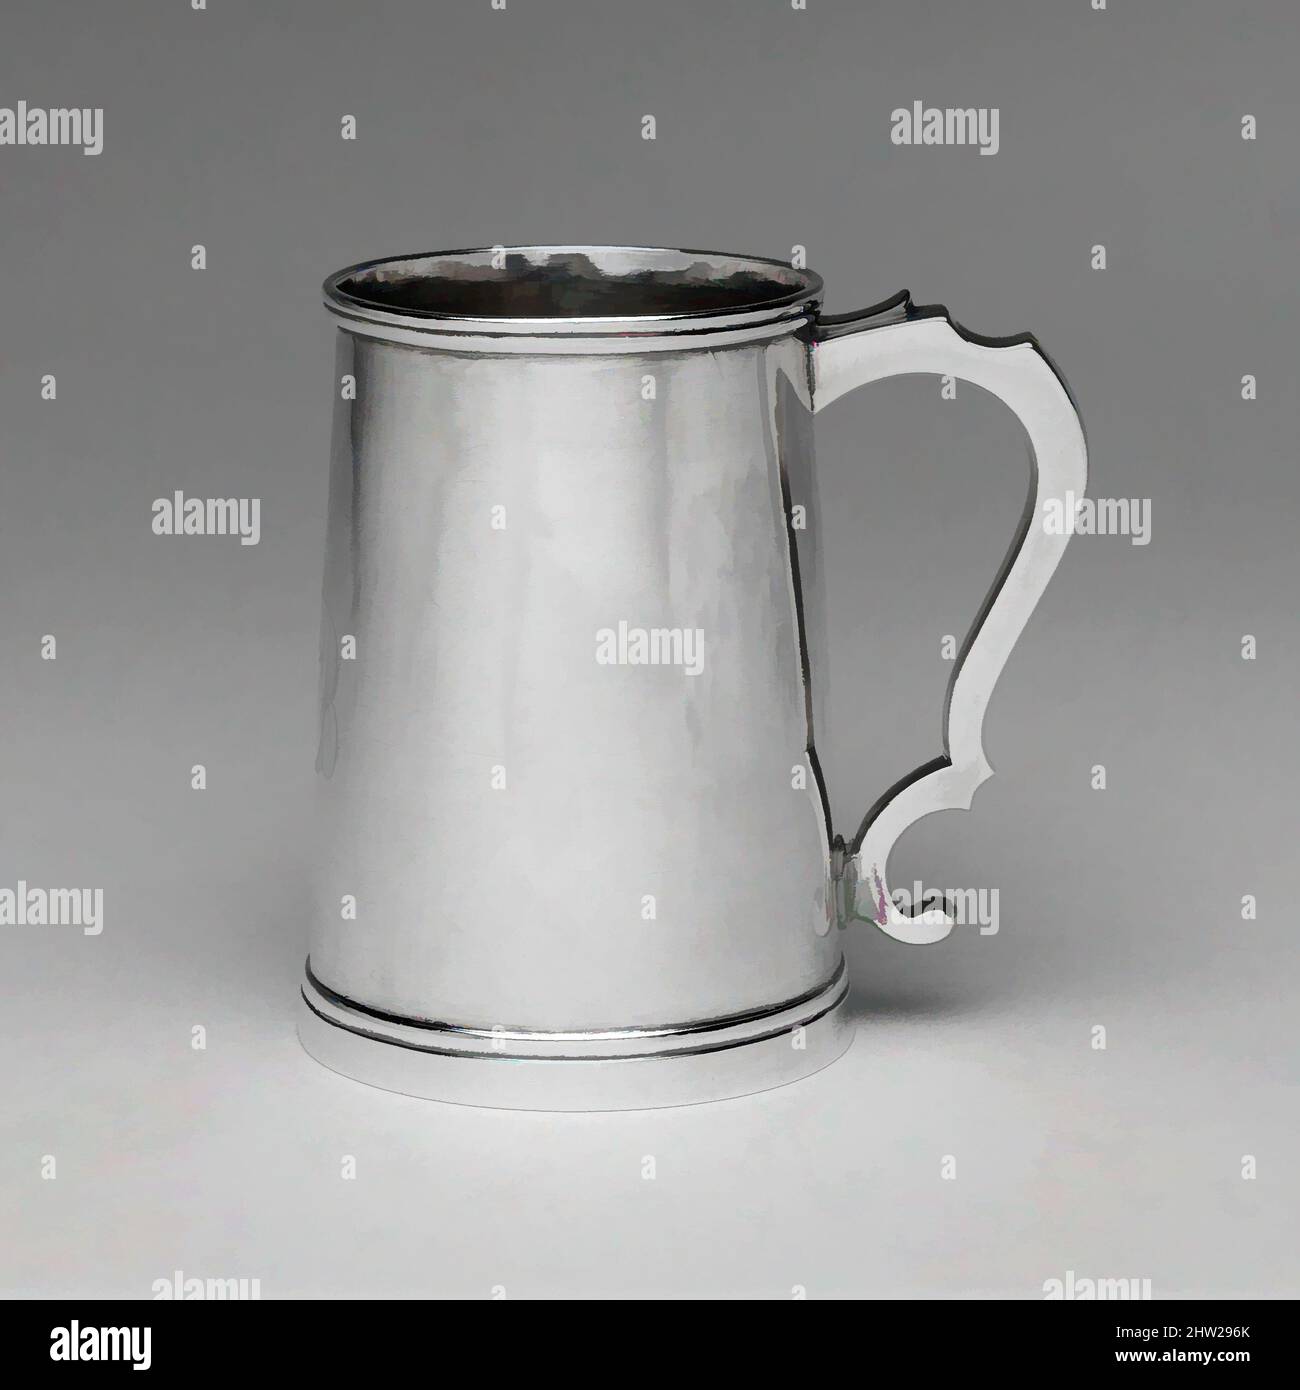 Art inspired by Mug, 1825–50, Made in Newburyport, Massachusetts, United States, American, Silver, Overall: 5 3/16 x 5 3/8 in. (13.2 x 13.7 cm); 14 oz. 9 dwt. (449.1 g), Silver, William Moulton, IV (1772–1861, Classic works modernized by Artotop with a splash of modernity. Shapes, color and value, eye-catching visual impact on art. Emotions through freedom of artworks in a contemporary way. A timeless message pursuing a wildly creative new direction. Artists turning to the digital medium and creating the Artotop NFT Stock Photo